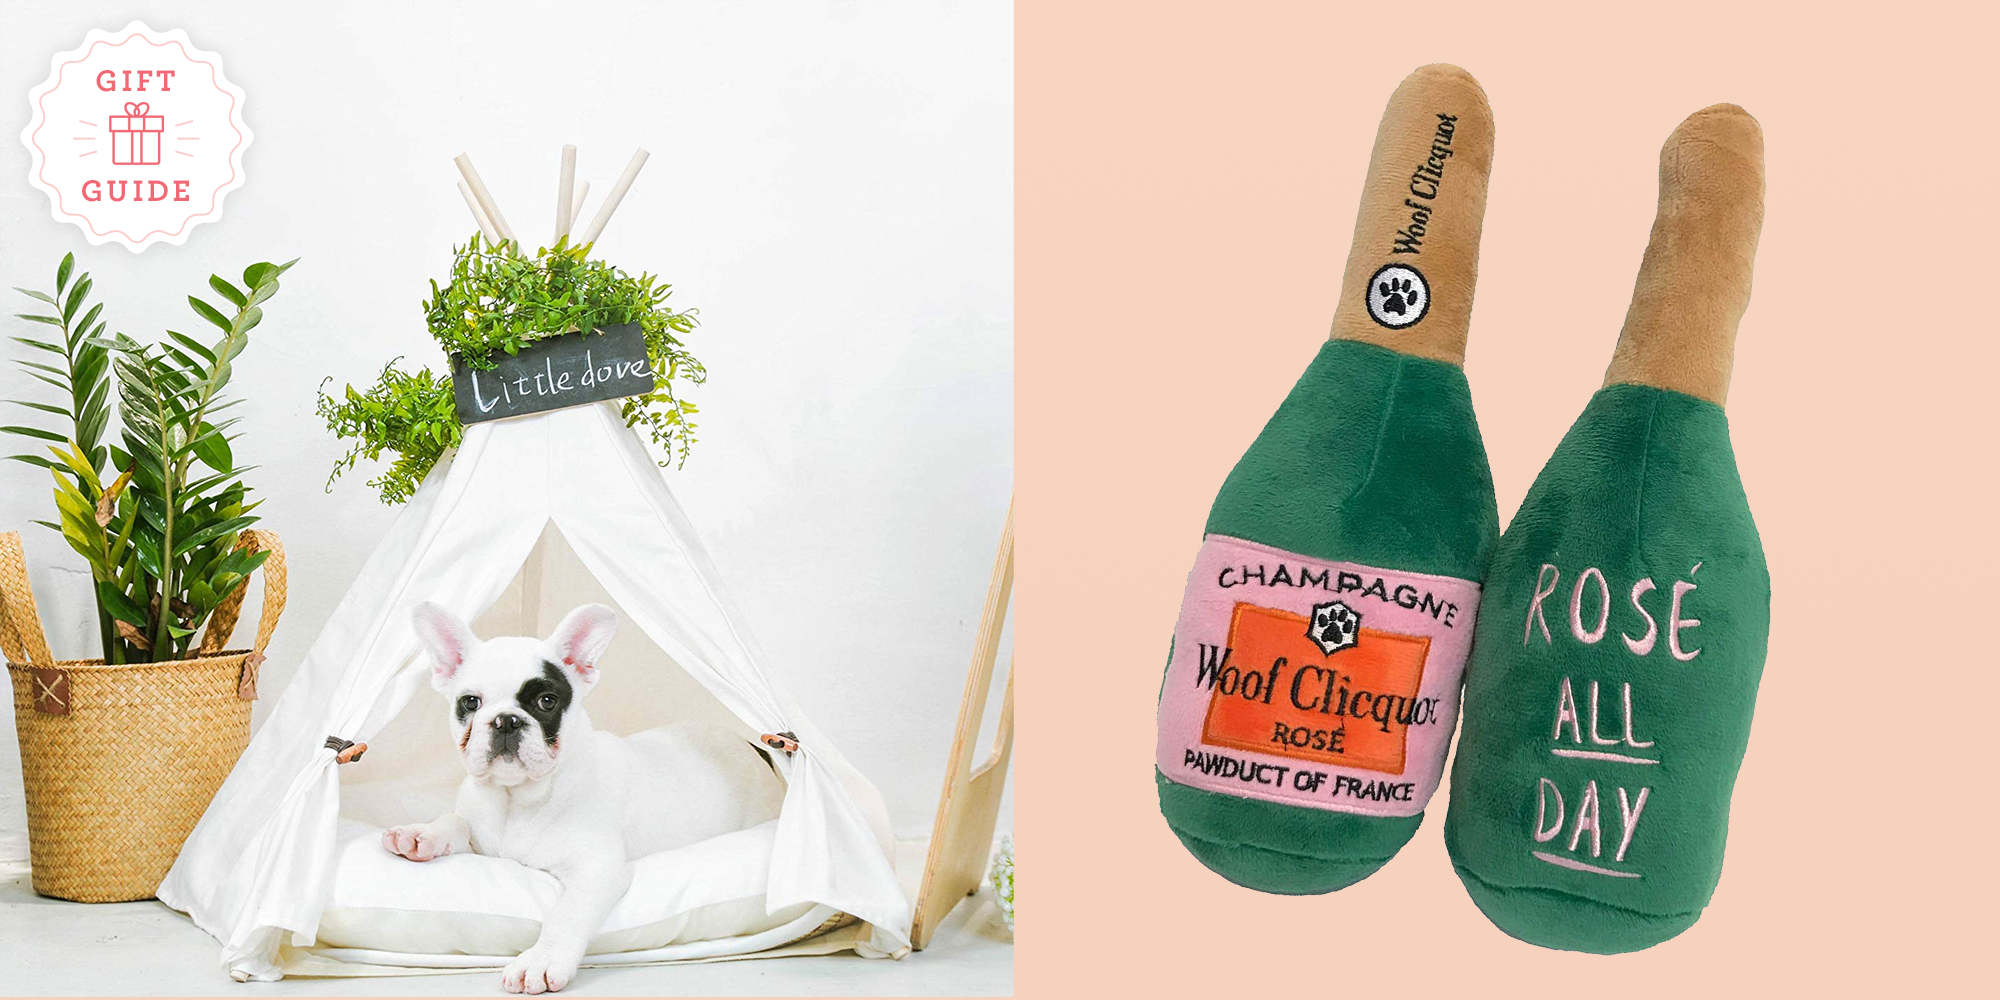 The best Christmas gifts for cats and dogs